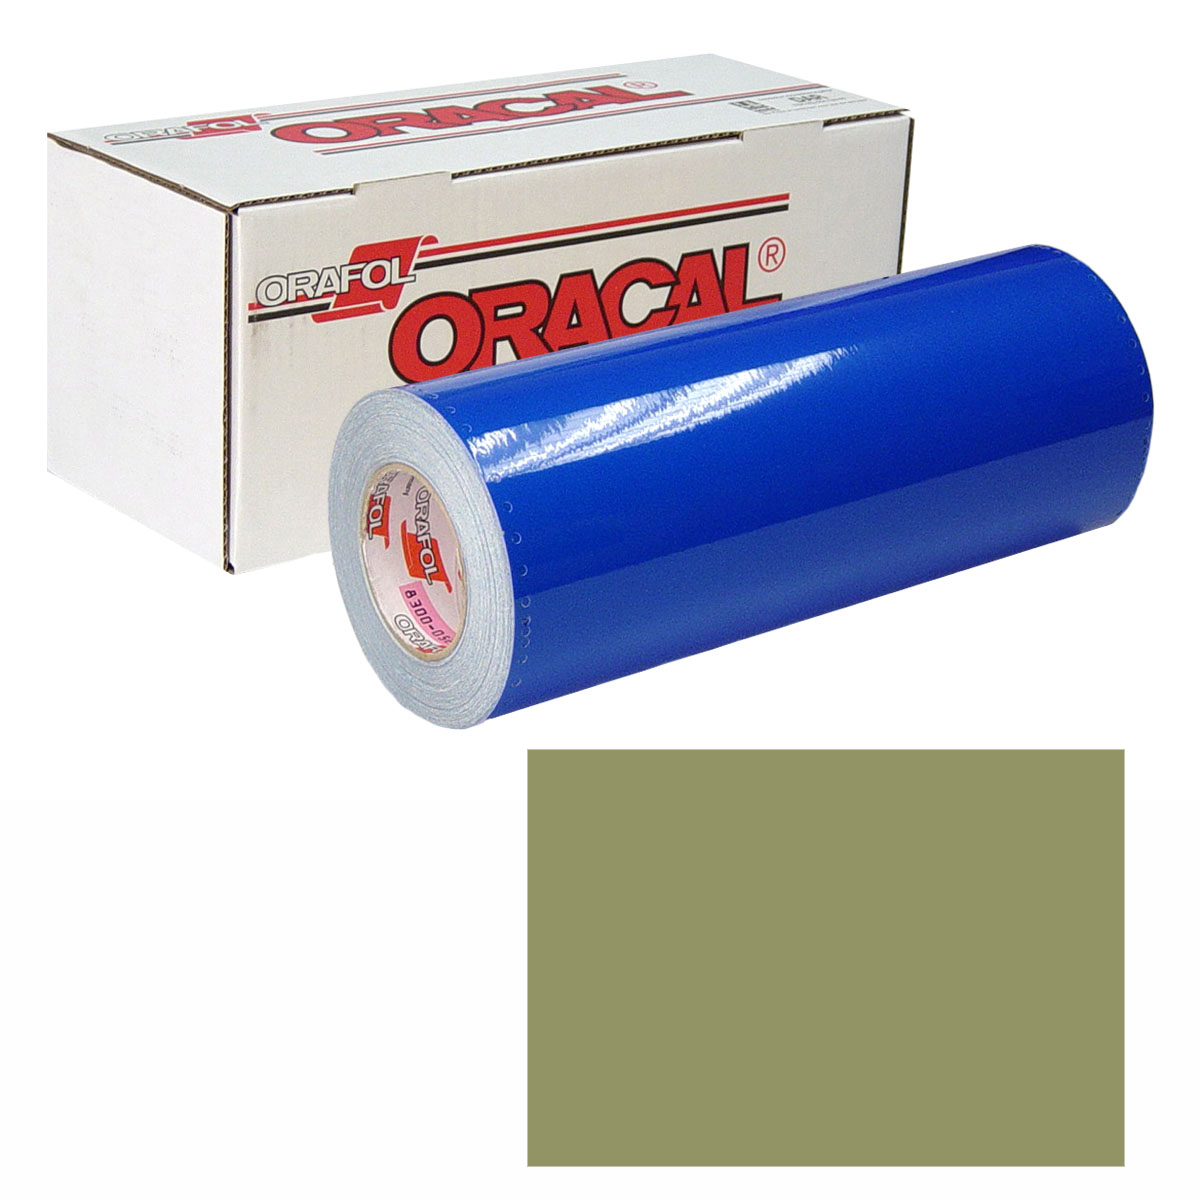 ORACAL 631 30in X 50yd 493 Olive